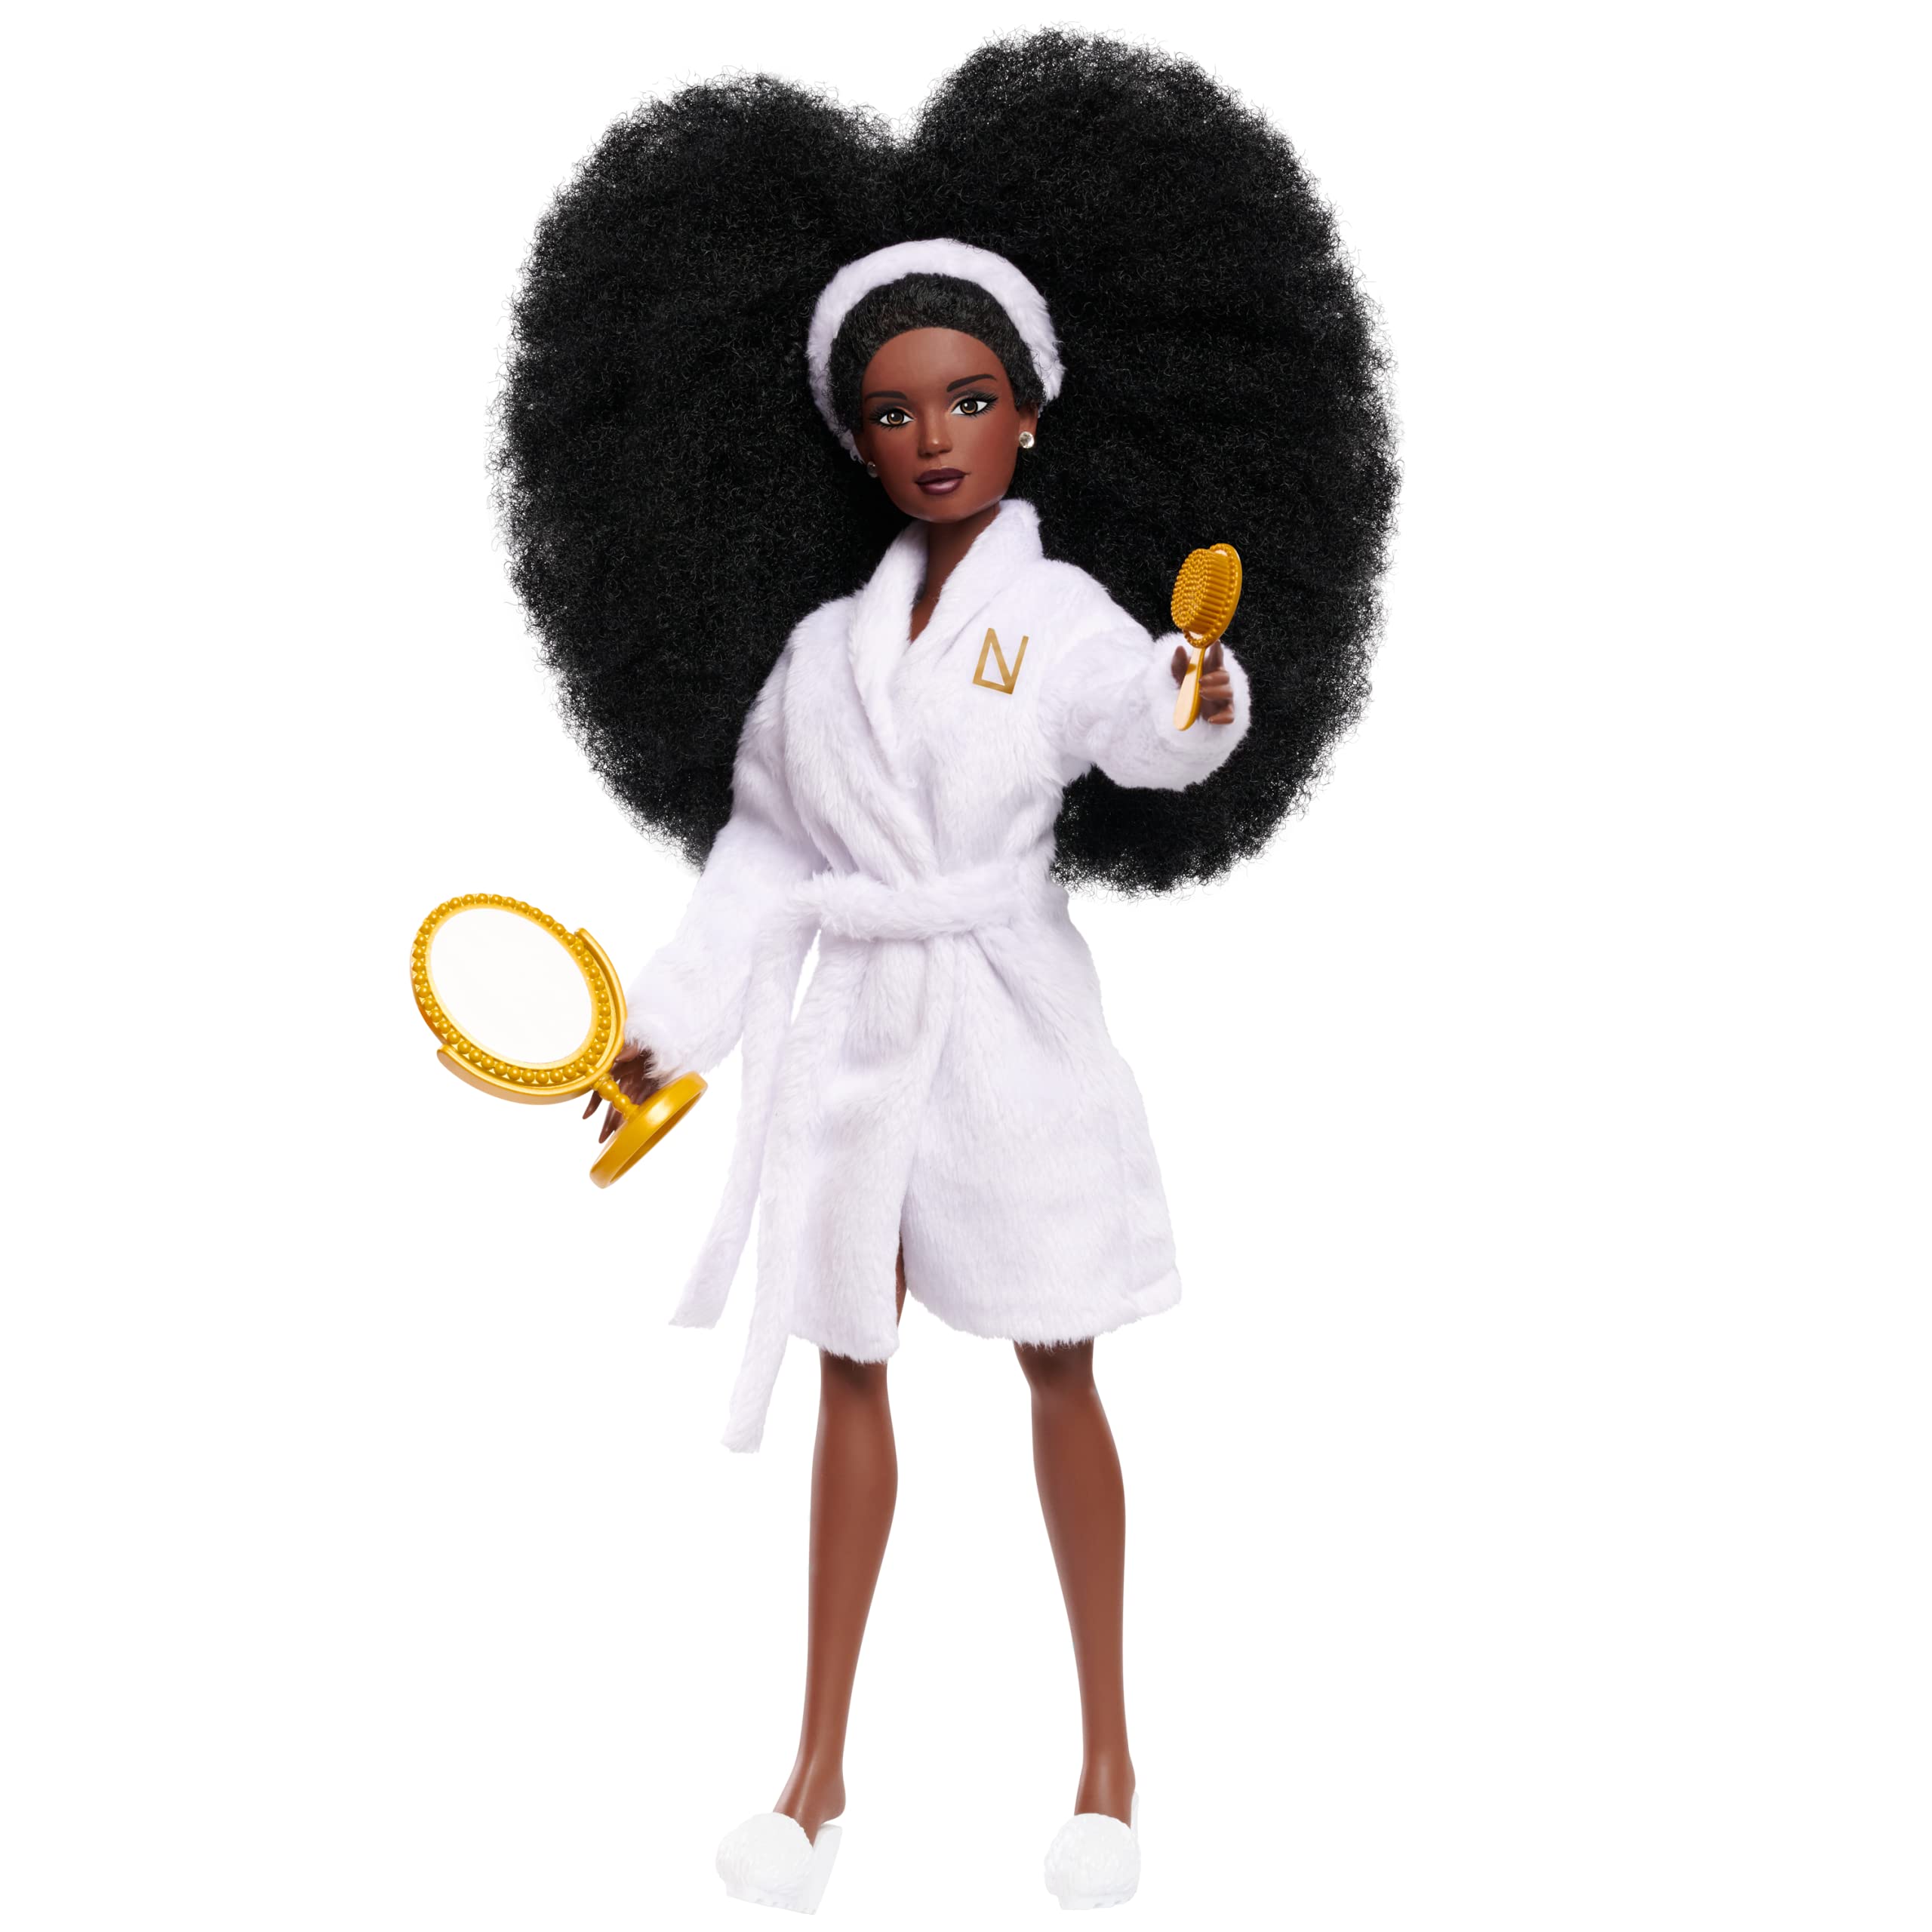 Naturalistas Fashion Pack Wash Day 5-Piece Outfit and Accessories Set for 11.5-Inch Tall Naturalistas Dolls, Designed and Developed by Purpose Toys